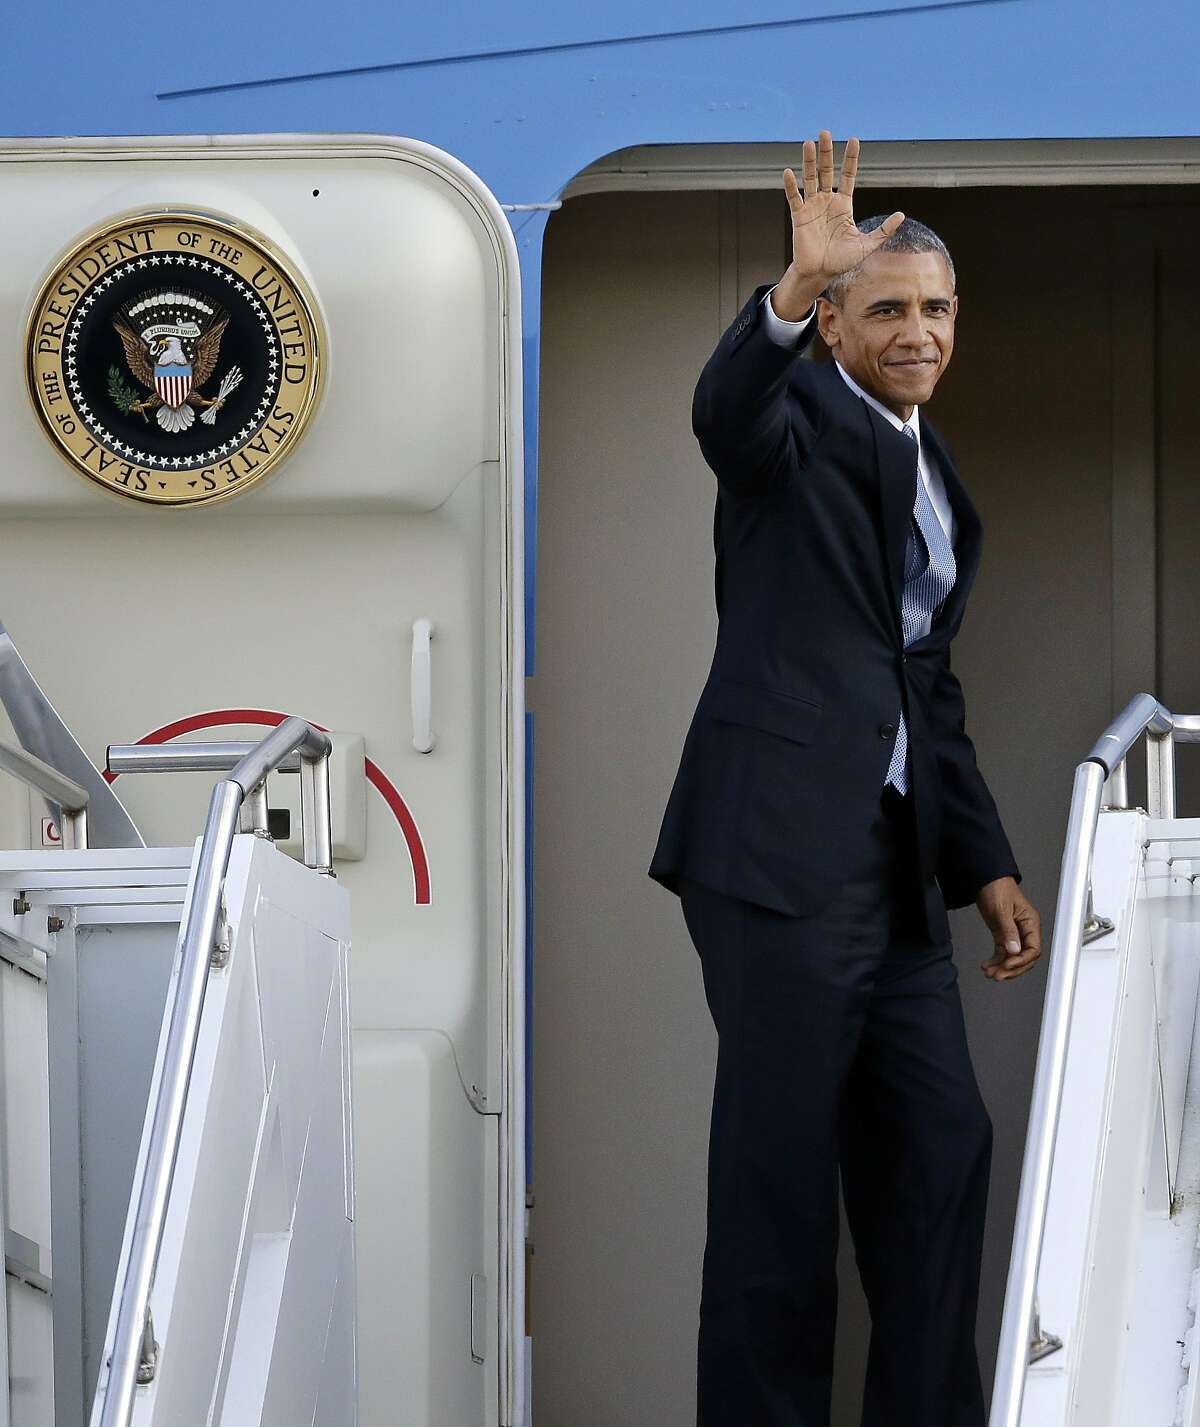 President Barack Obama waves as he prepares to depart Tuesday, July 22, 2014, from King County International Airport in Seattle. Obama is on a three-day West Coast trip that included at least five fundraising events in Seattle, San Francisco and Los Angeles. (AP Photo)